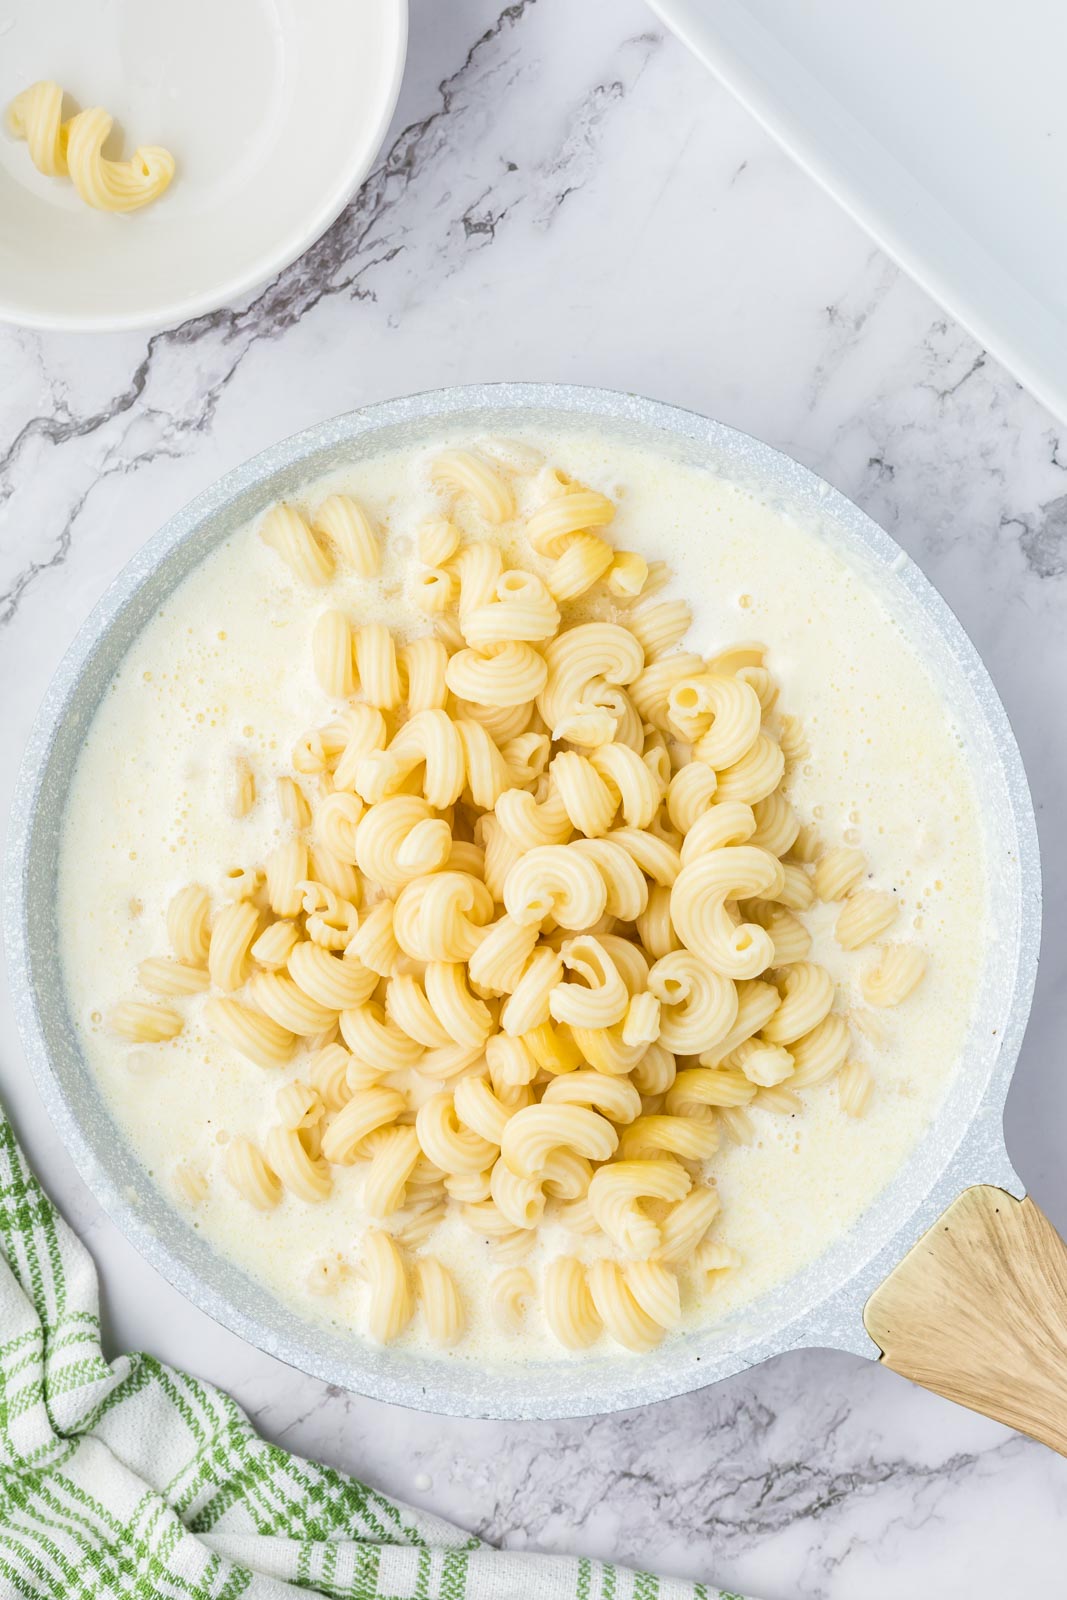 Adding cooked macaroni noodles to cheesy white sauce to make baked white mac and cheese.